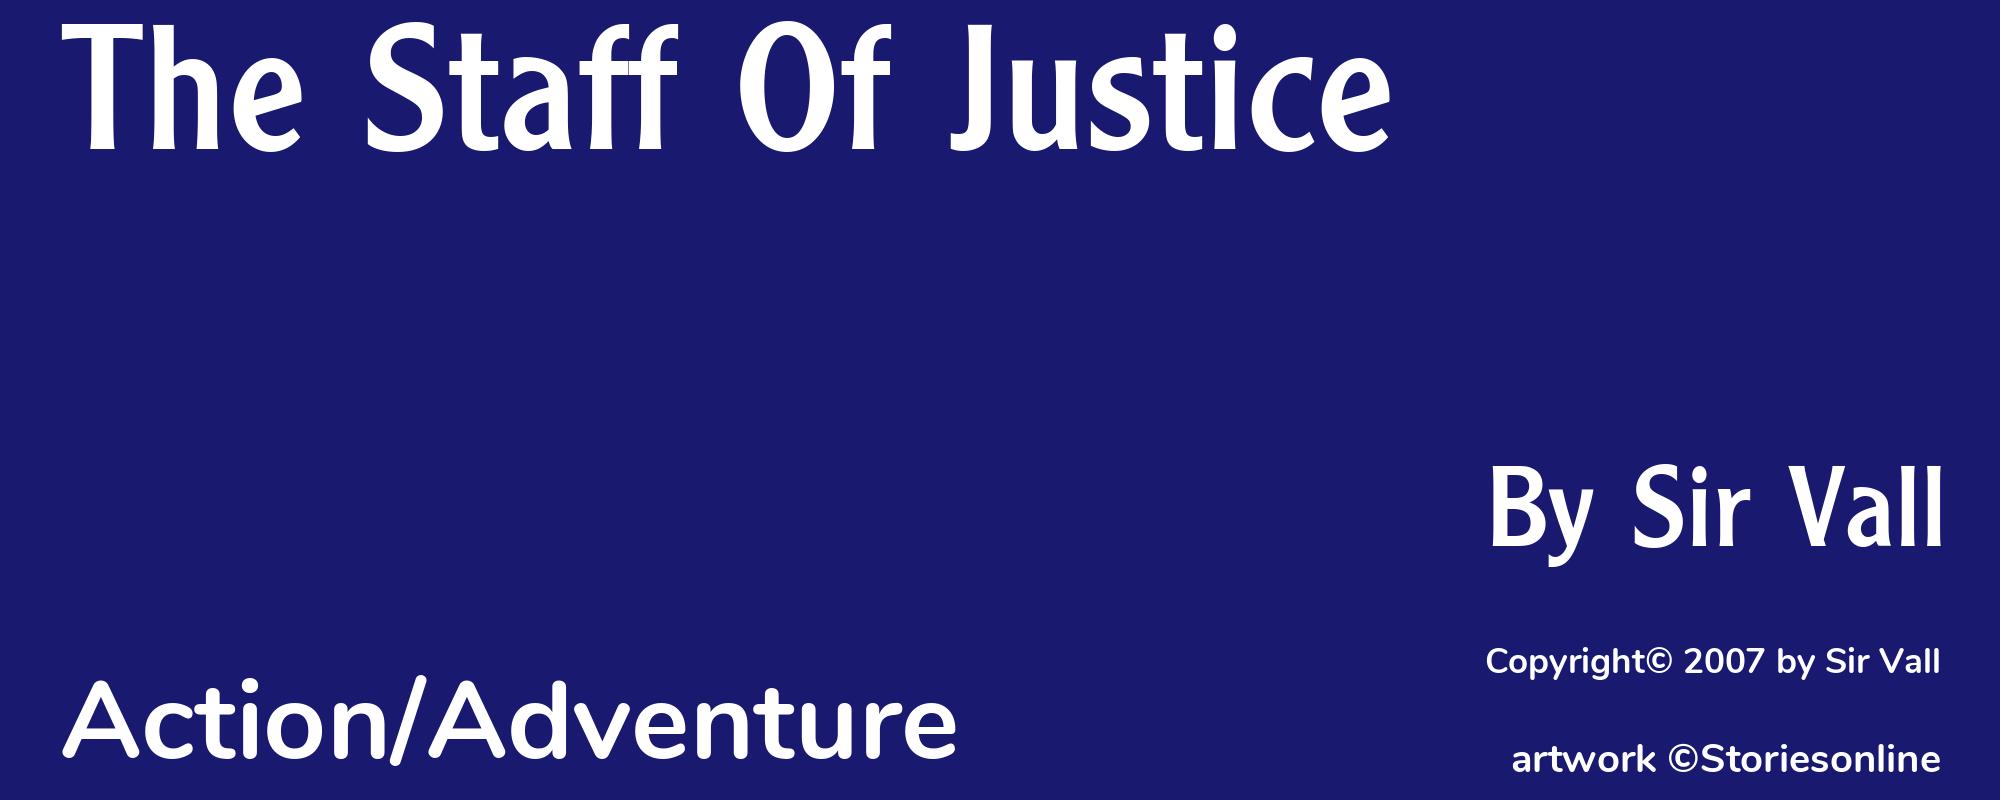 The Staff Of Justice - Cover